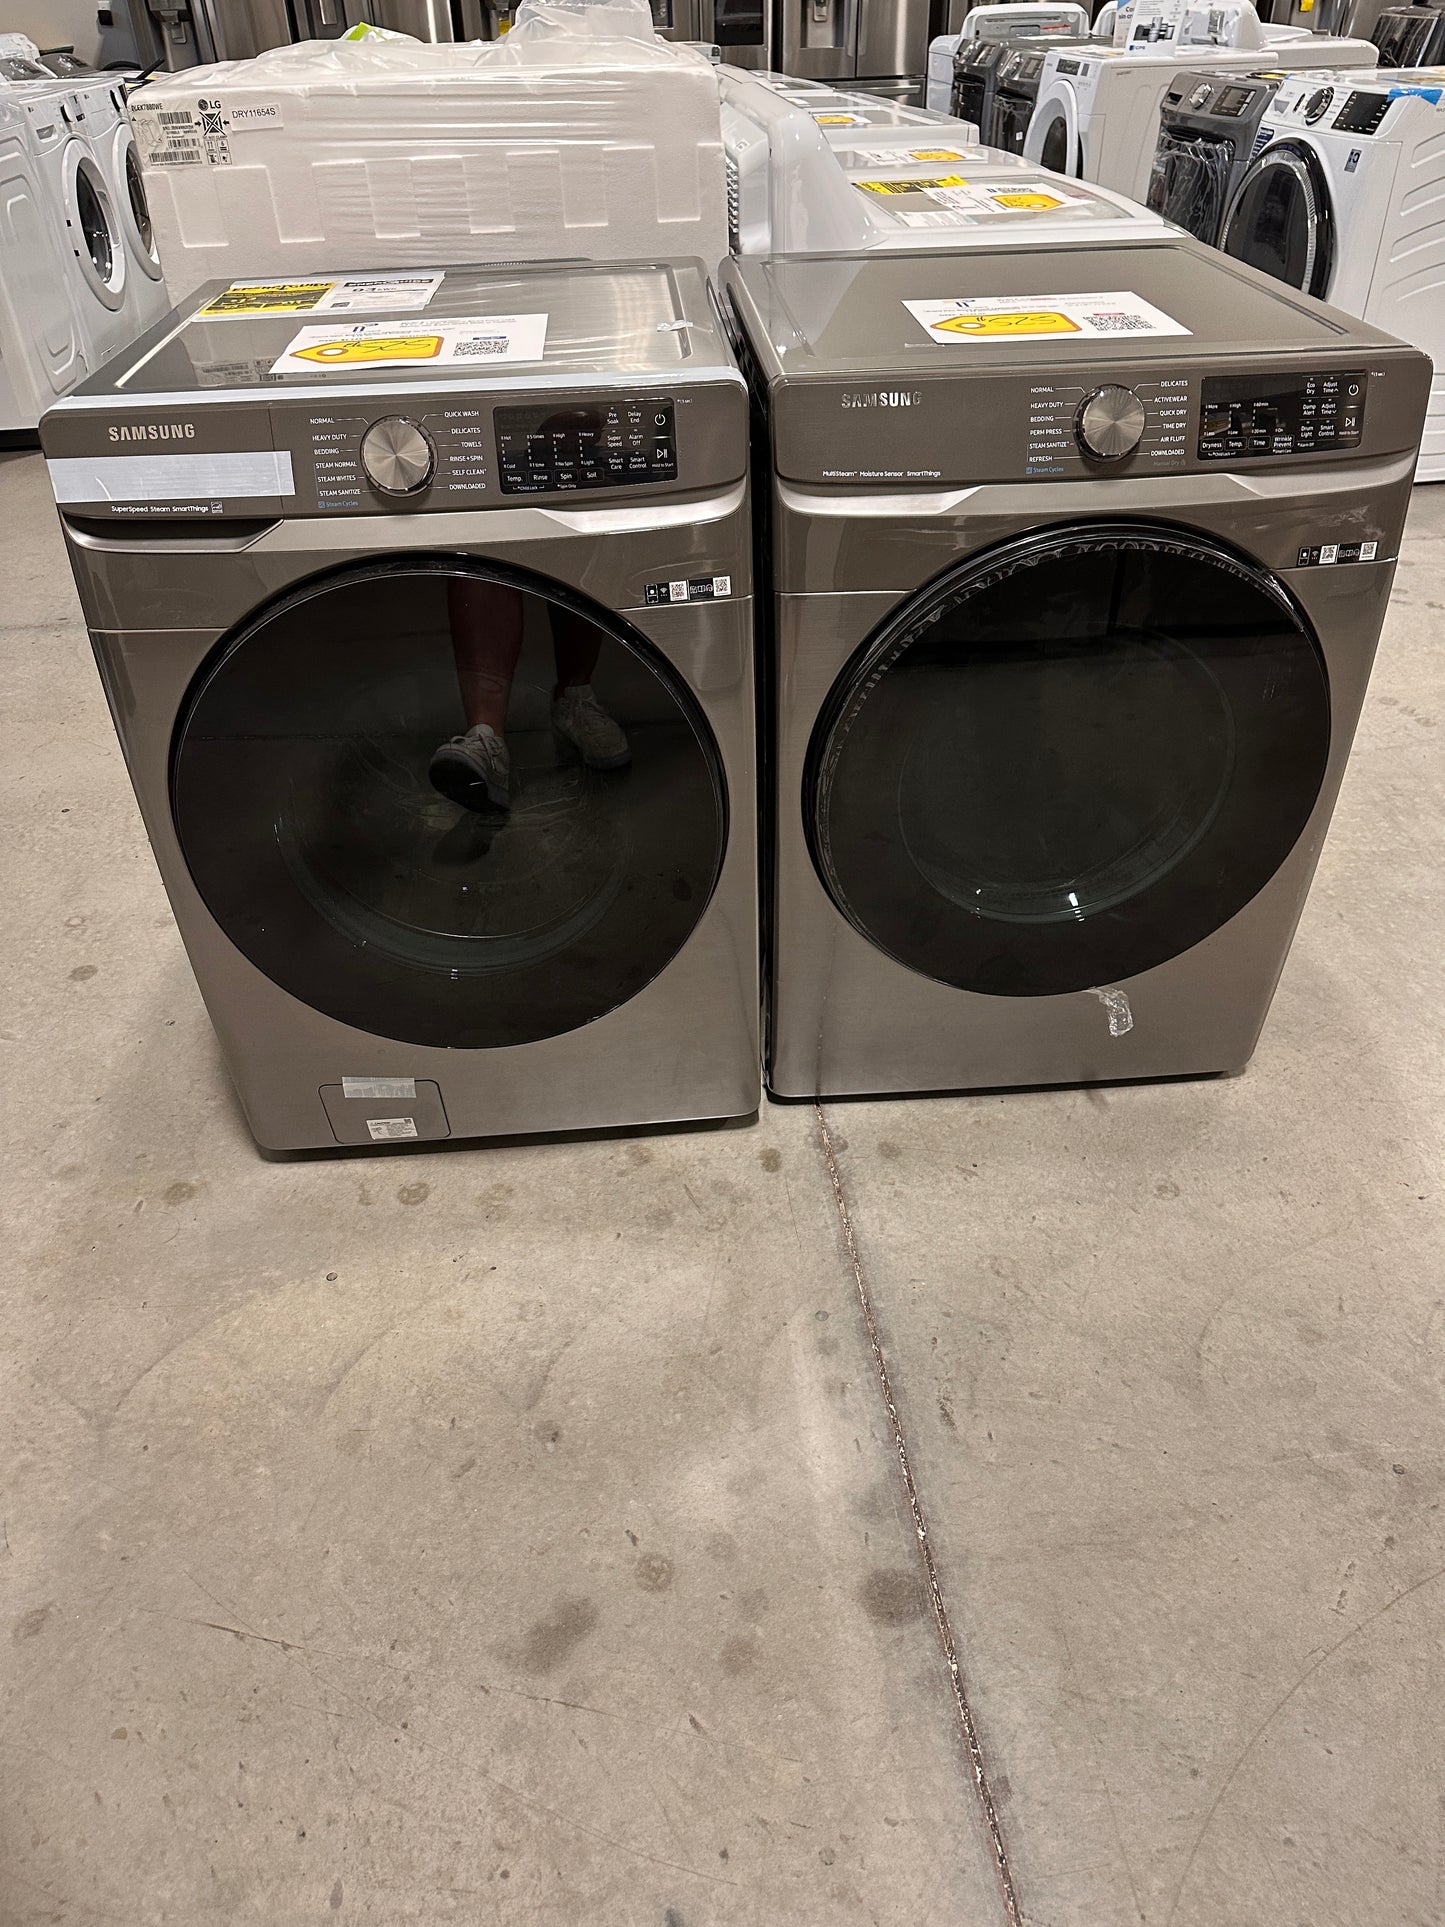 BEAUTIFUL NEW PLATINUM STACKABLE SAMSUNG LAUNDRY SET WAS13066 DRY12382